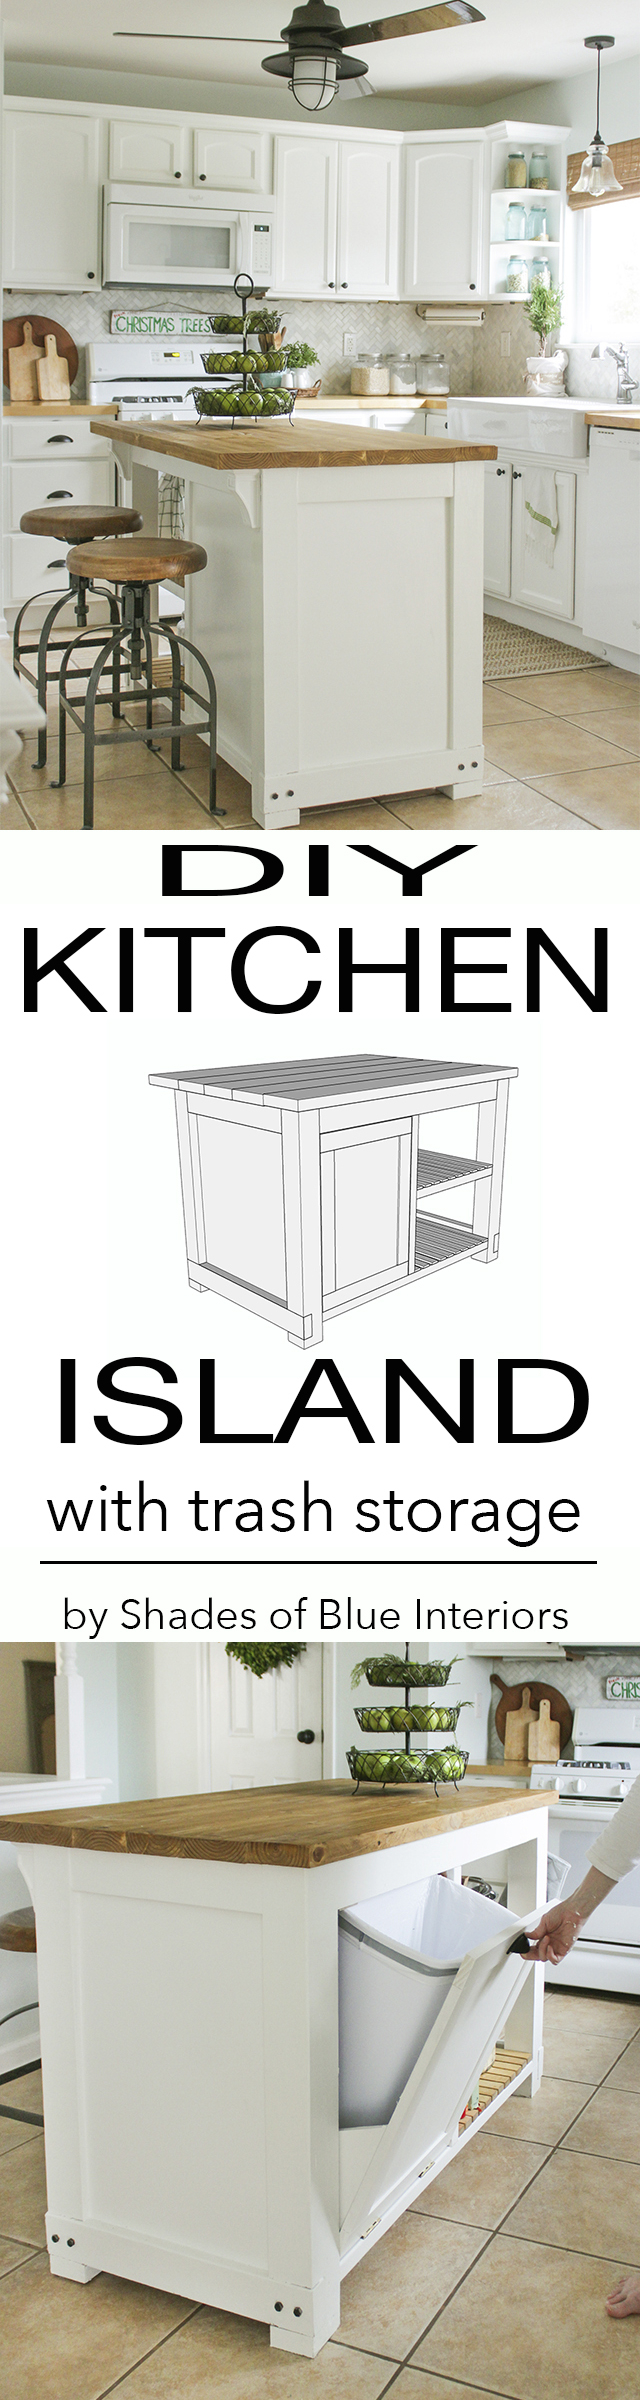 Diy Kitchen Island With Trash Storage Shades Of Blue Interiors within measurements 640 X 2400